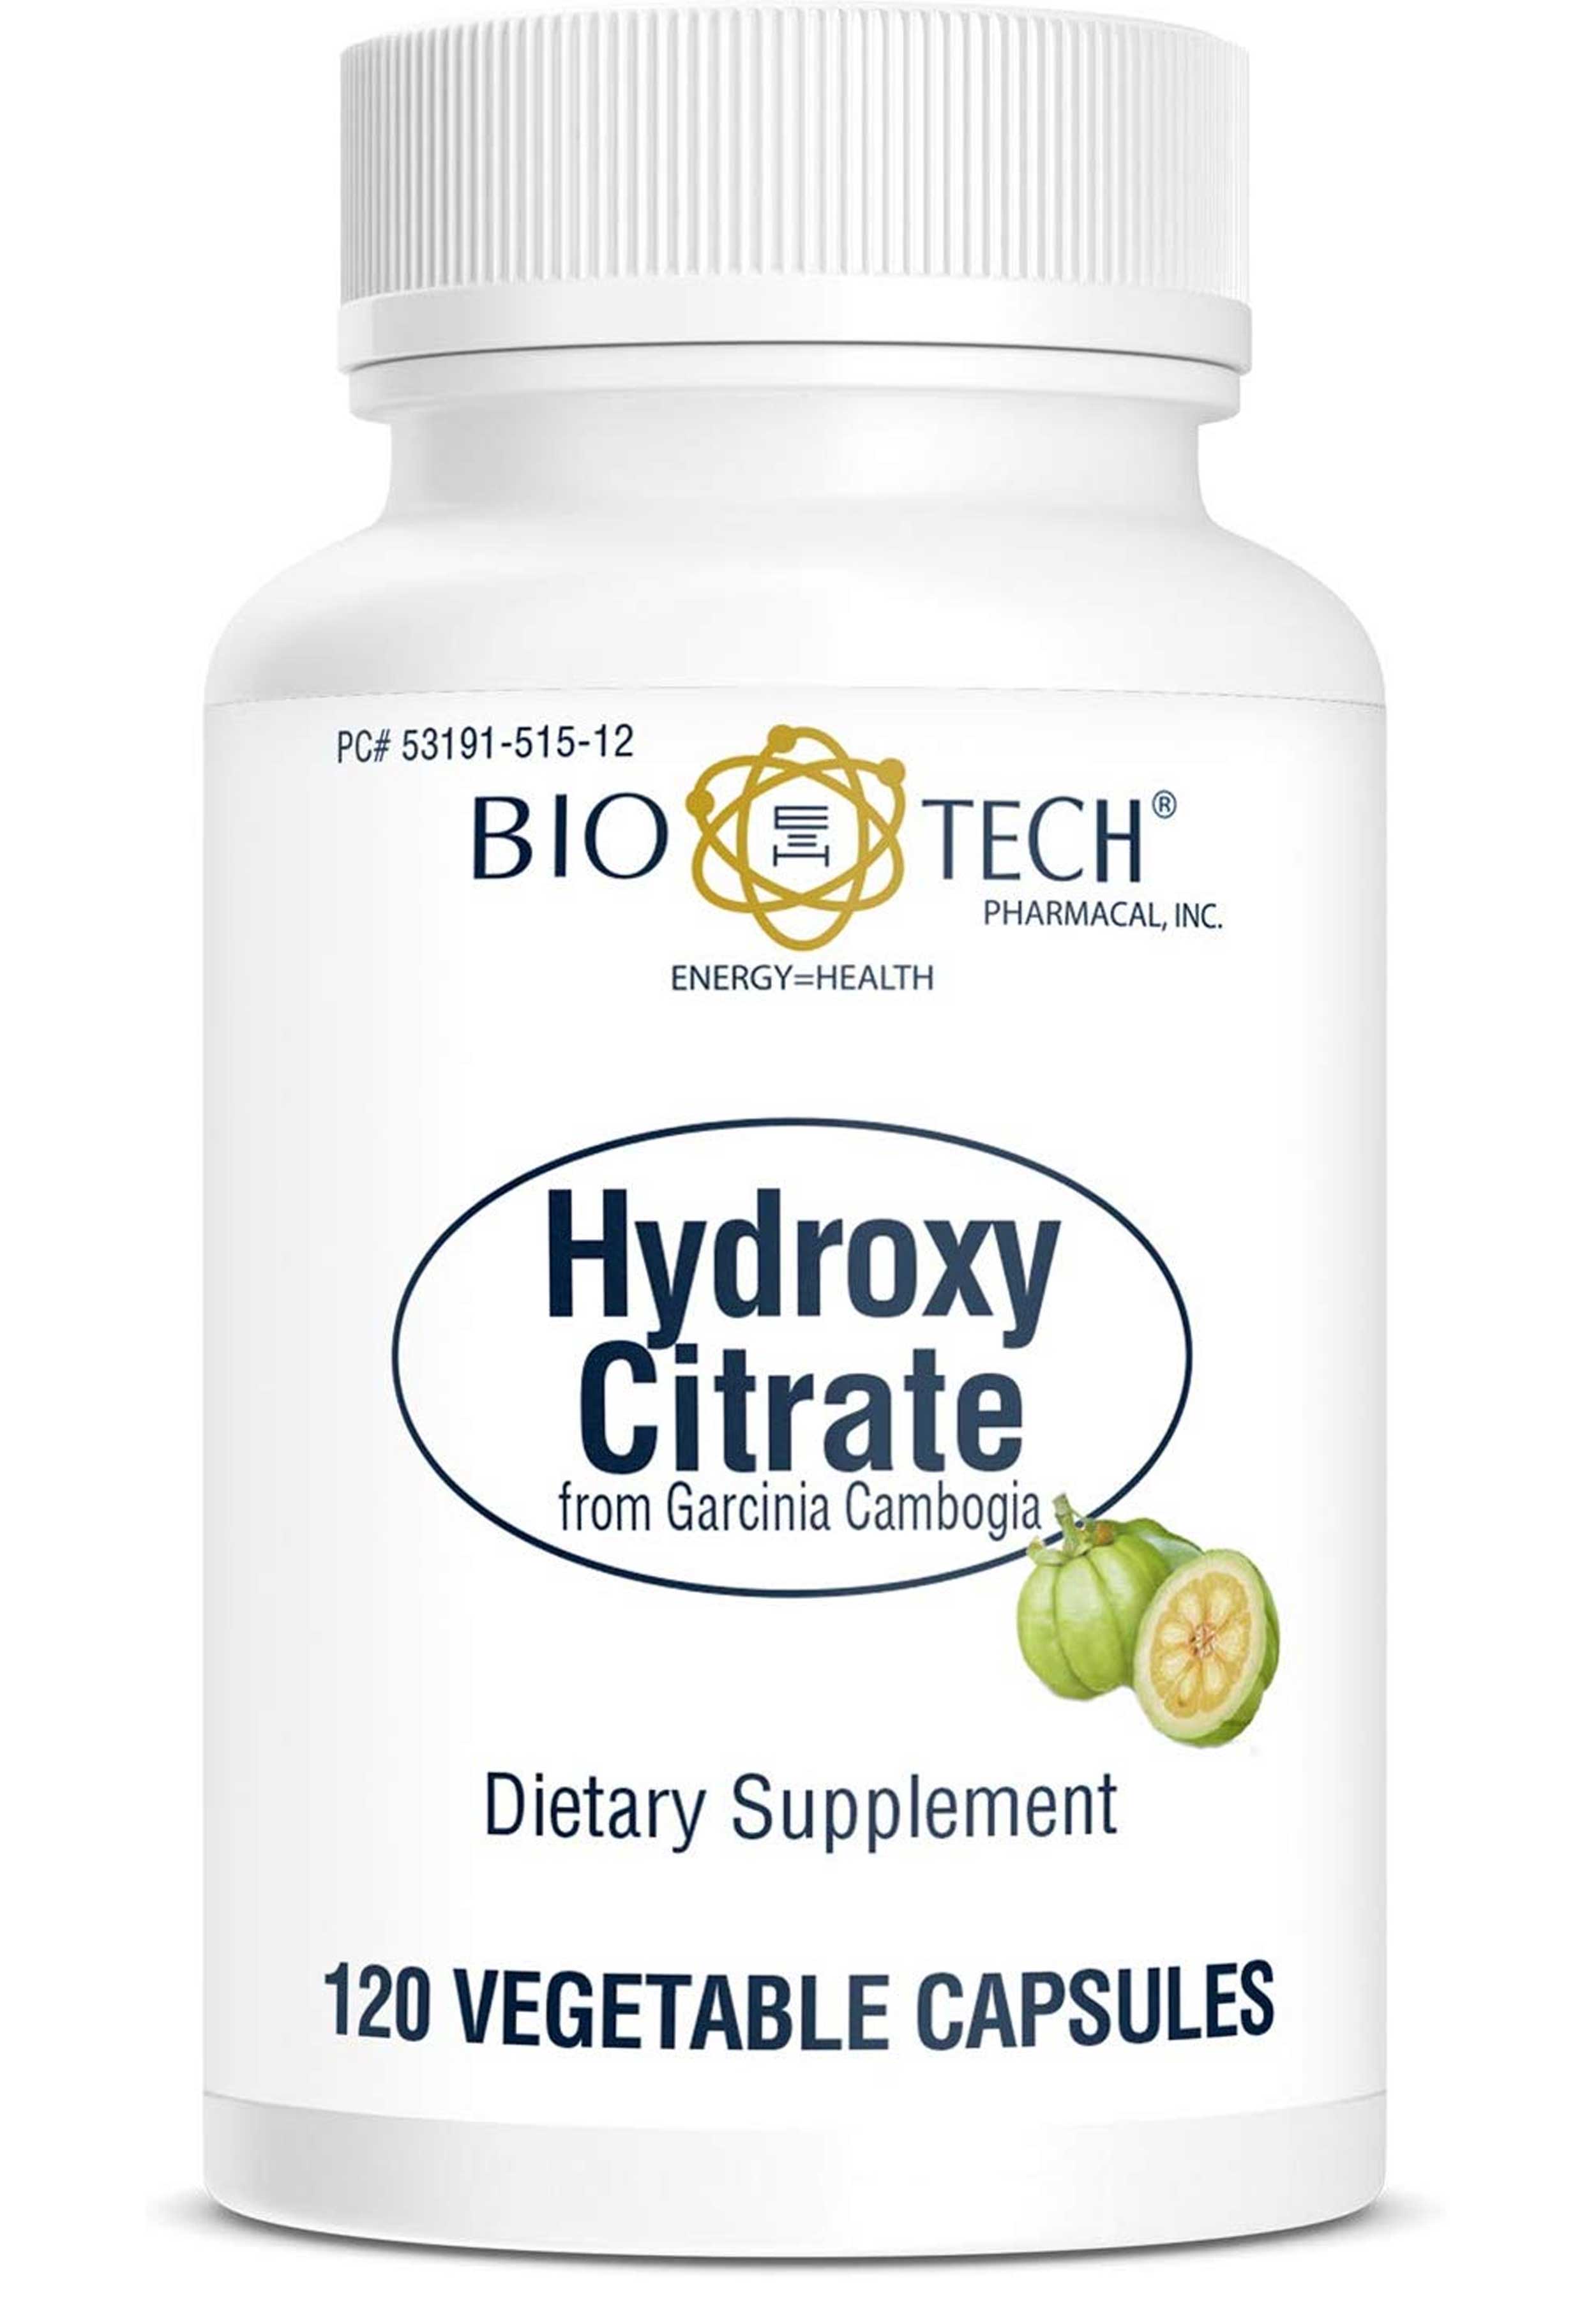 Bio-Tech Pharmacal Hydroxy-Citrate